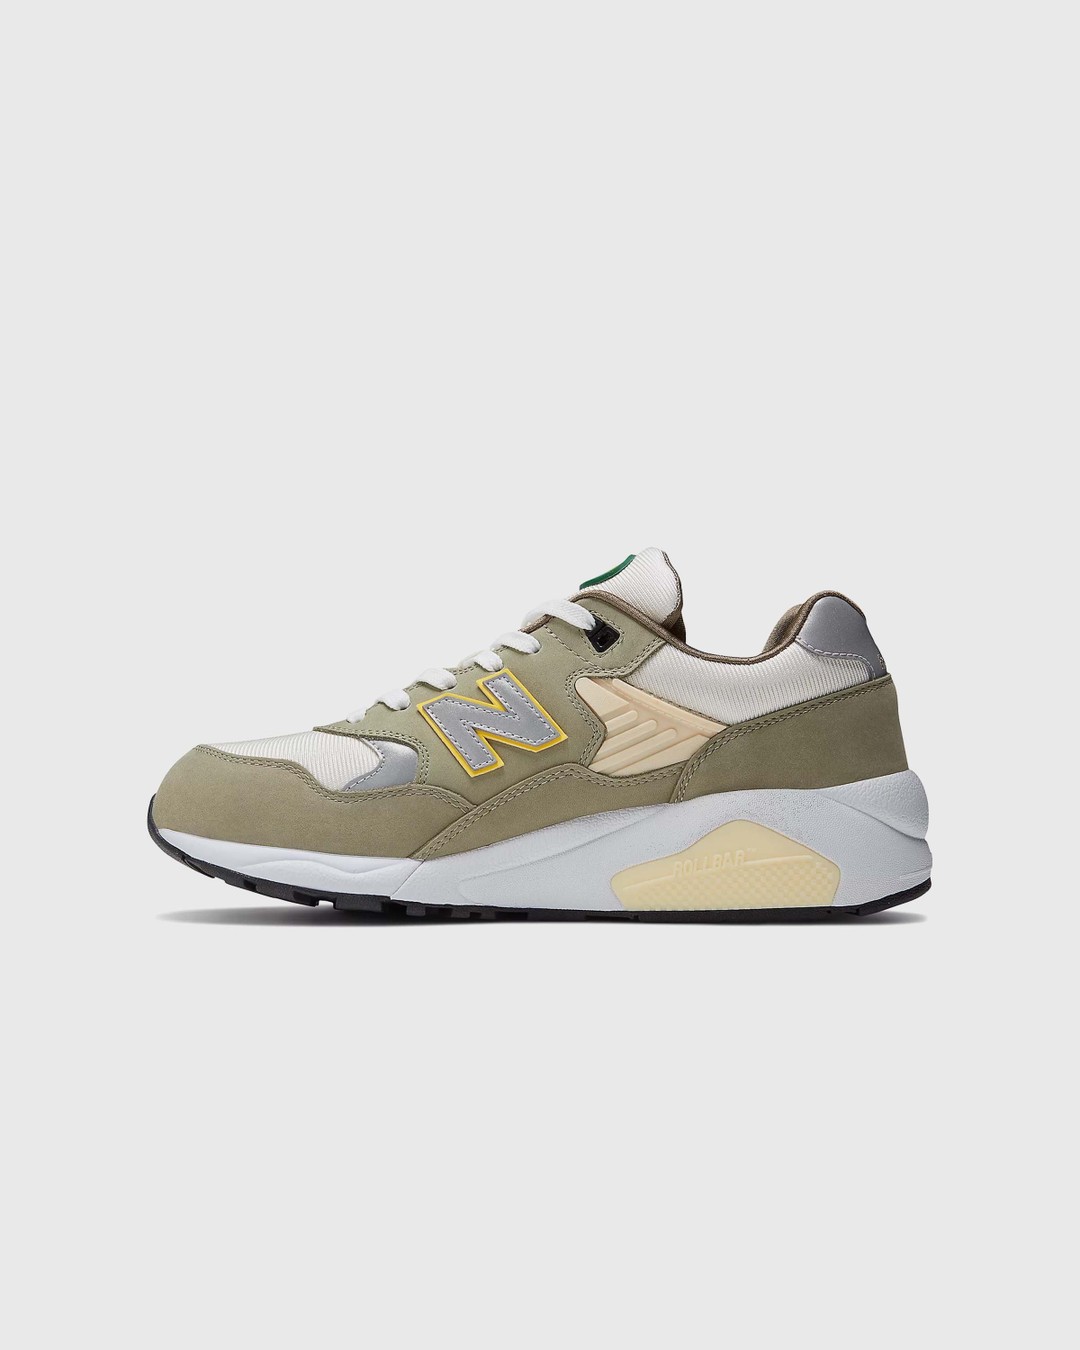 New Balance – MT580AC2 Olive Leaf - Low Top Sneakers - Green - Image 2